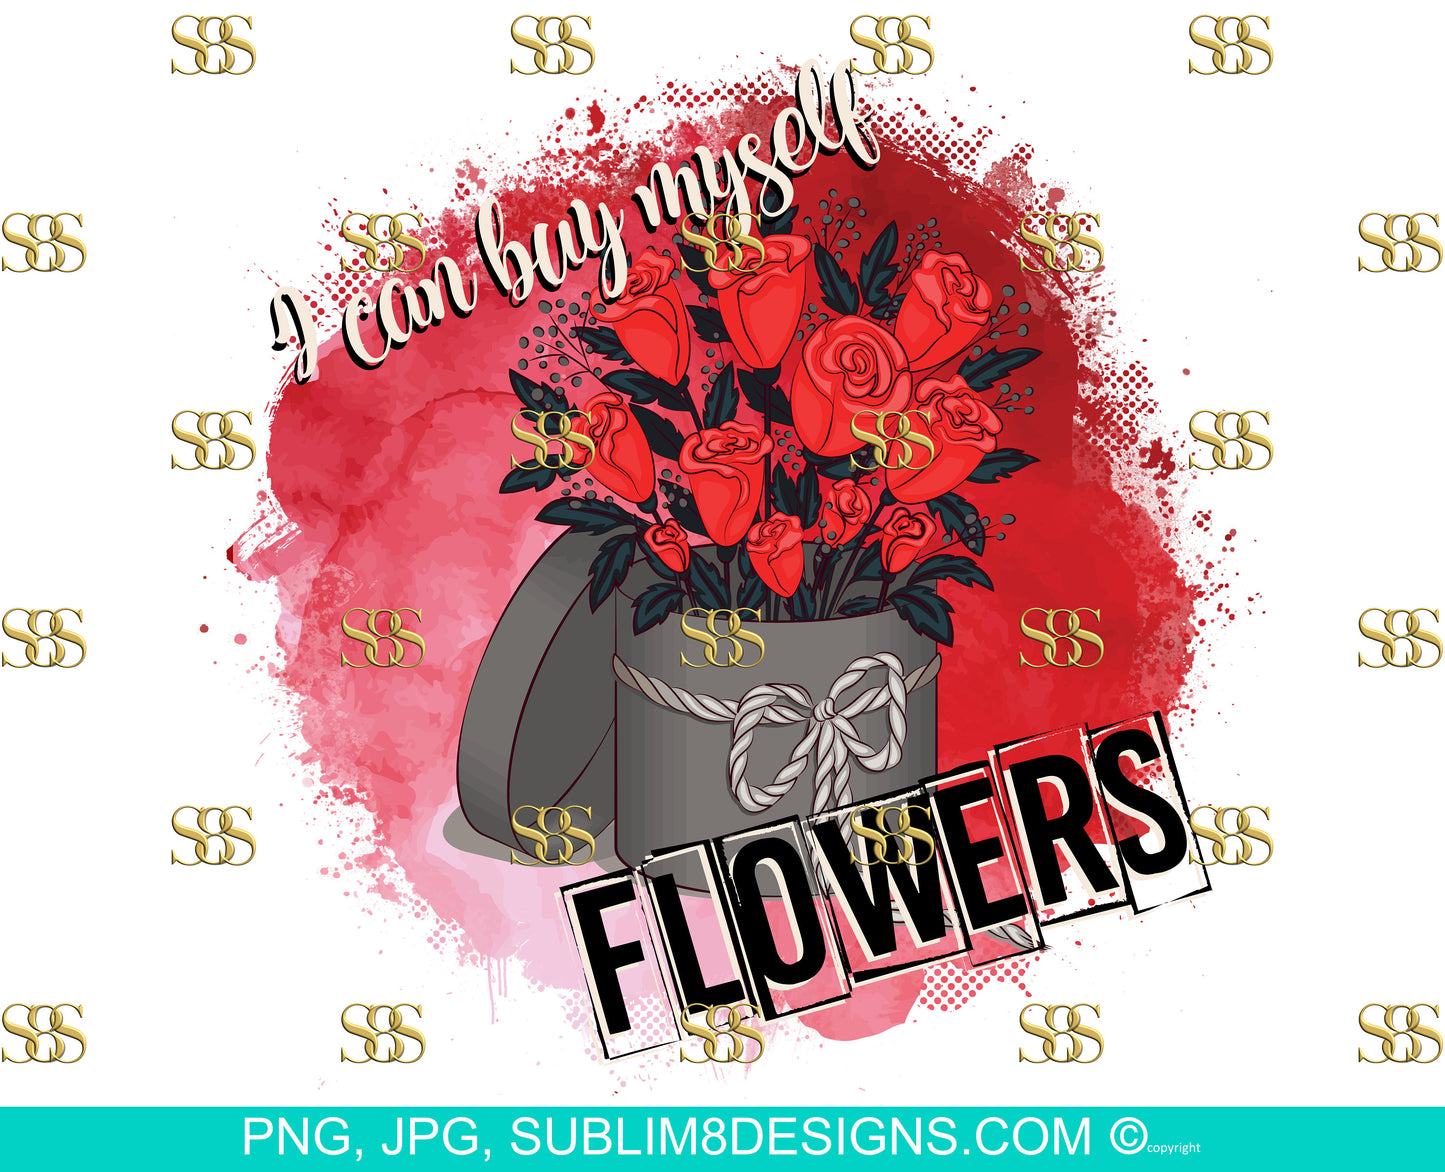 I can Buy Myself Flowers Sublimation Design PNG and JPG ONLY